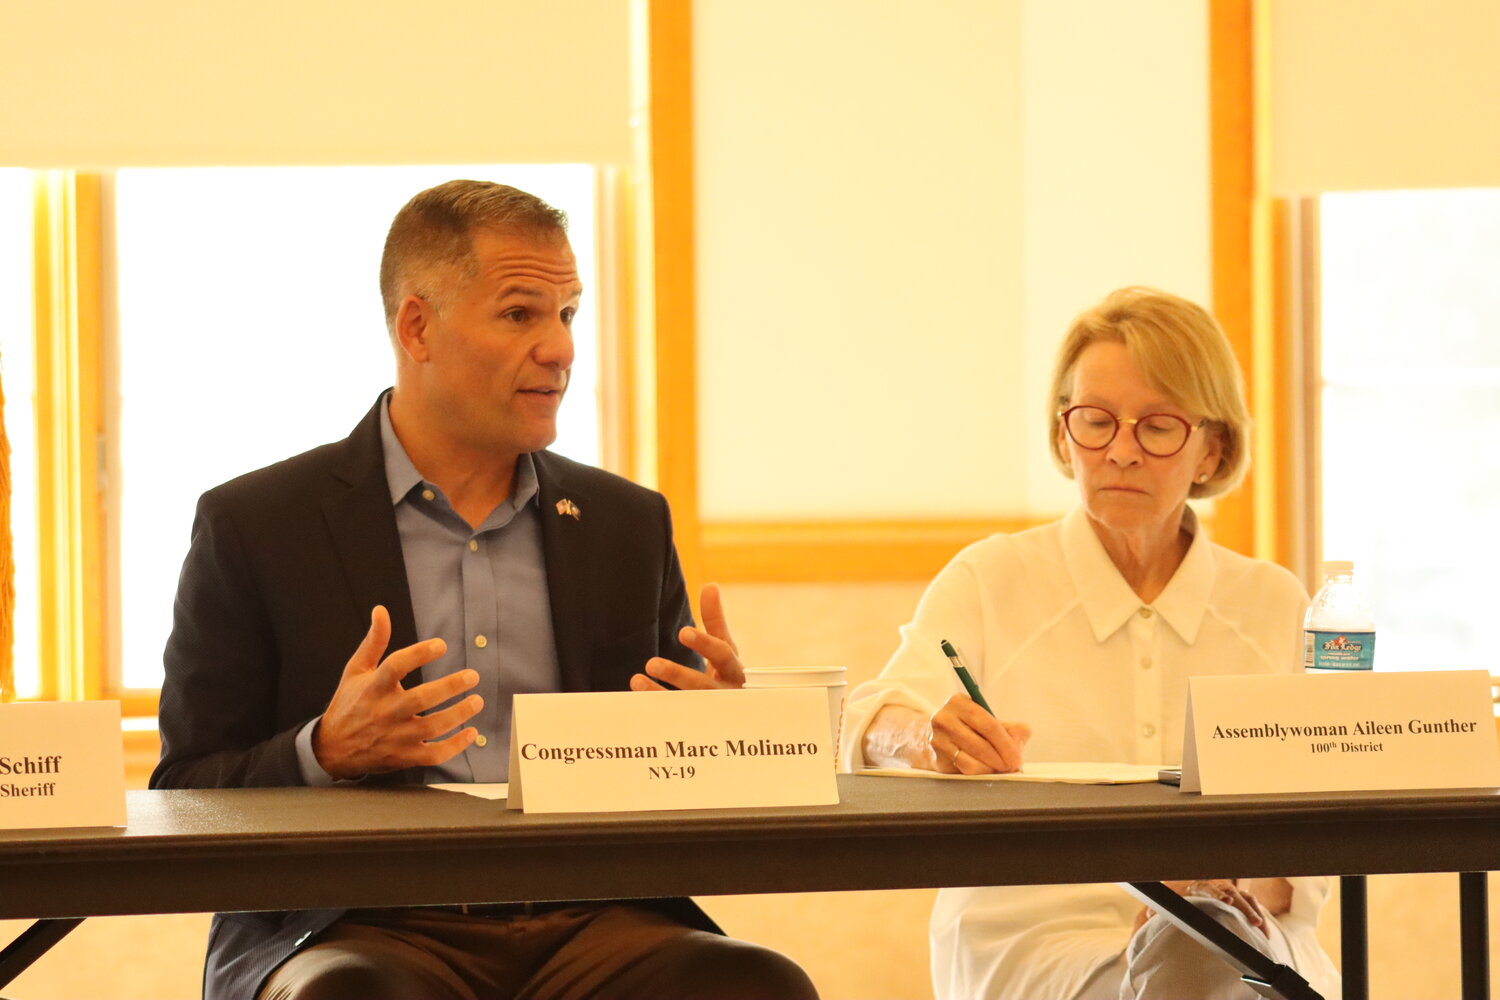 Representative Marc Molinaro, left, hosts a roundtable to discuss opioid crisis solutions on September 5. Assemblywoman Aileen Gunther is in attendance as well as other stakeholders who are working on the problem.